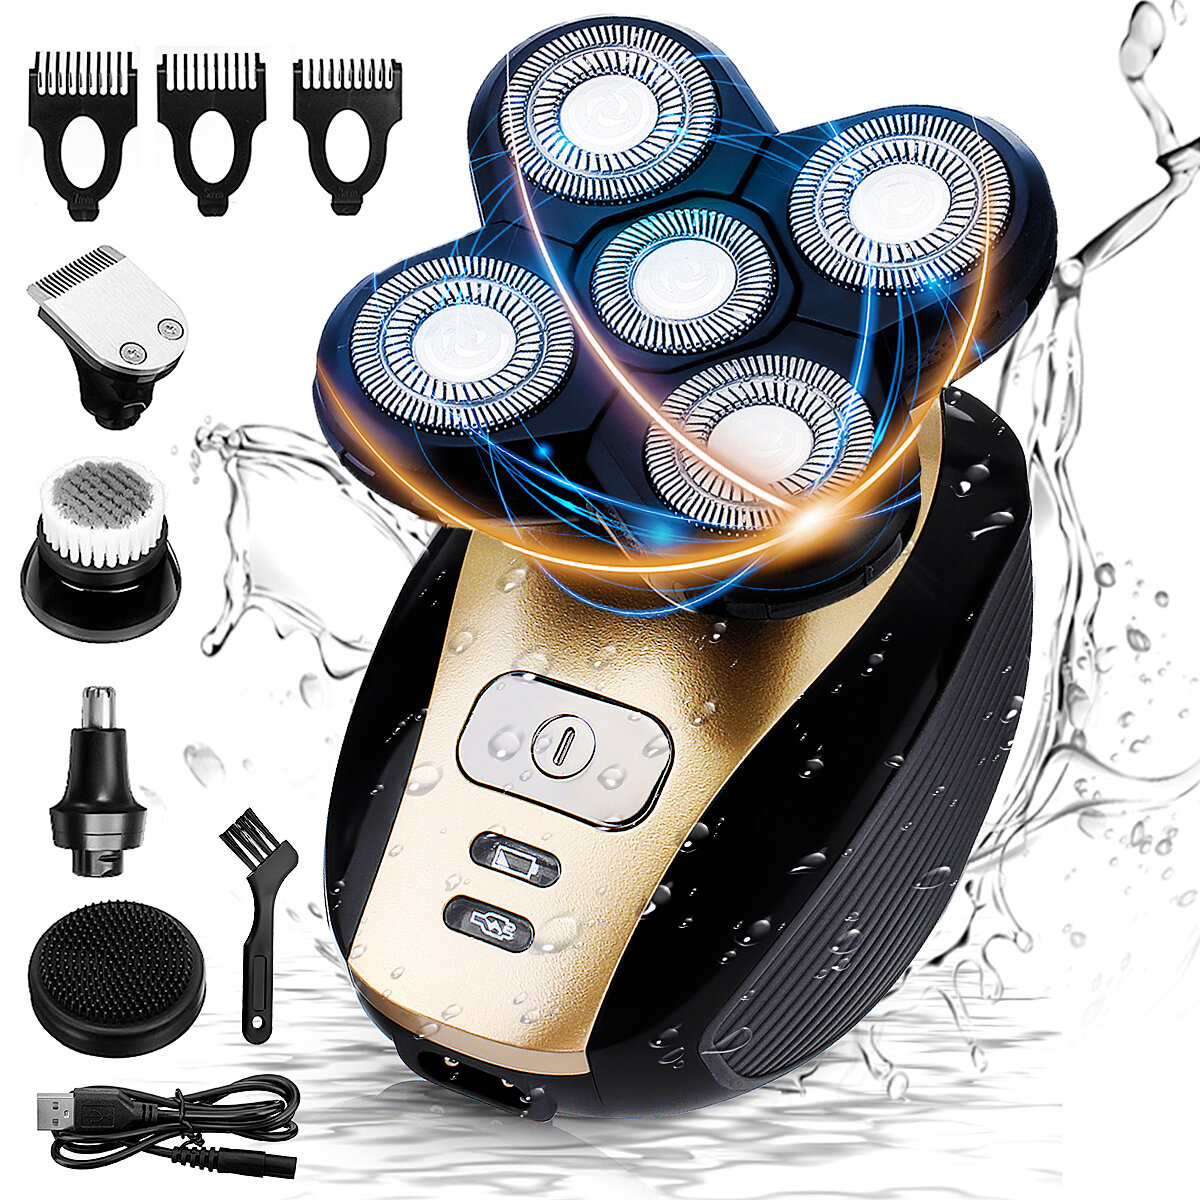 

5 in 1 Electric Razor for Men Bald Head Shaver USB Rechargeable Beard Hair Grooming Kit